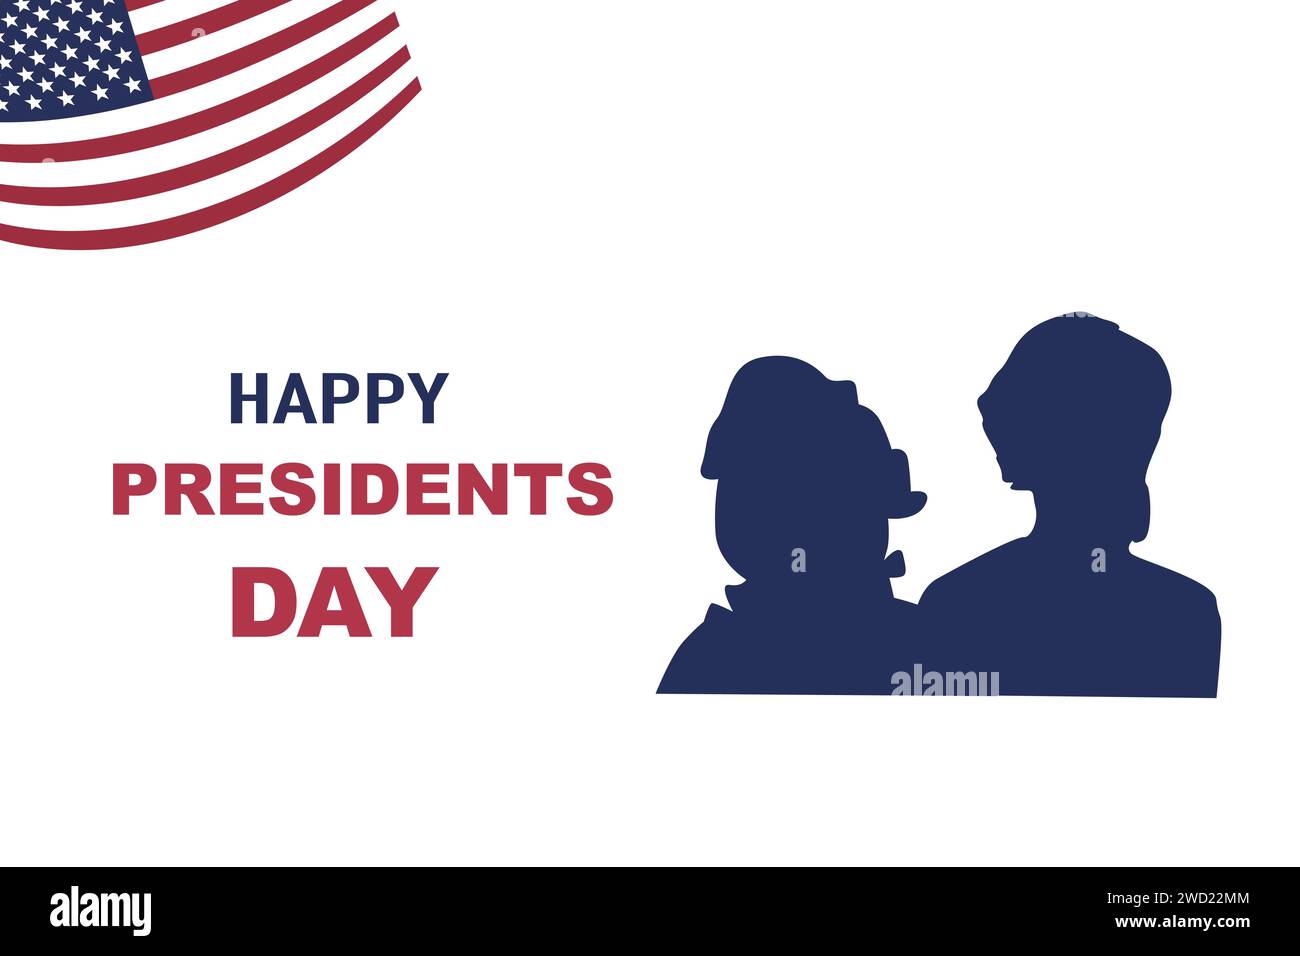 Happy president day of America, Washington day banner background. Vector illustration can used for federal holiday president day of USA.  Stock Vector